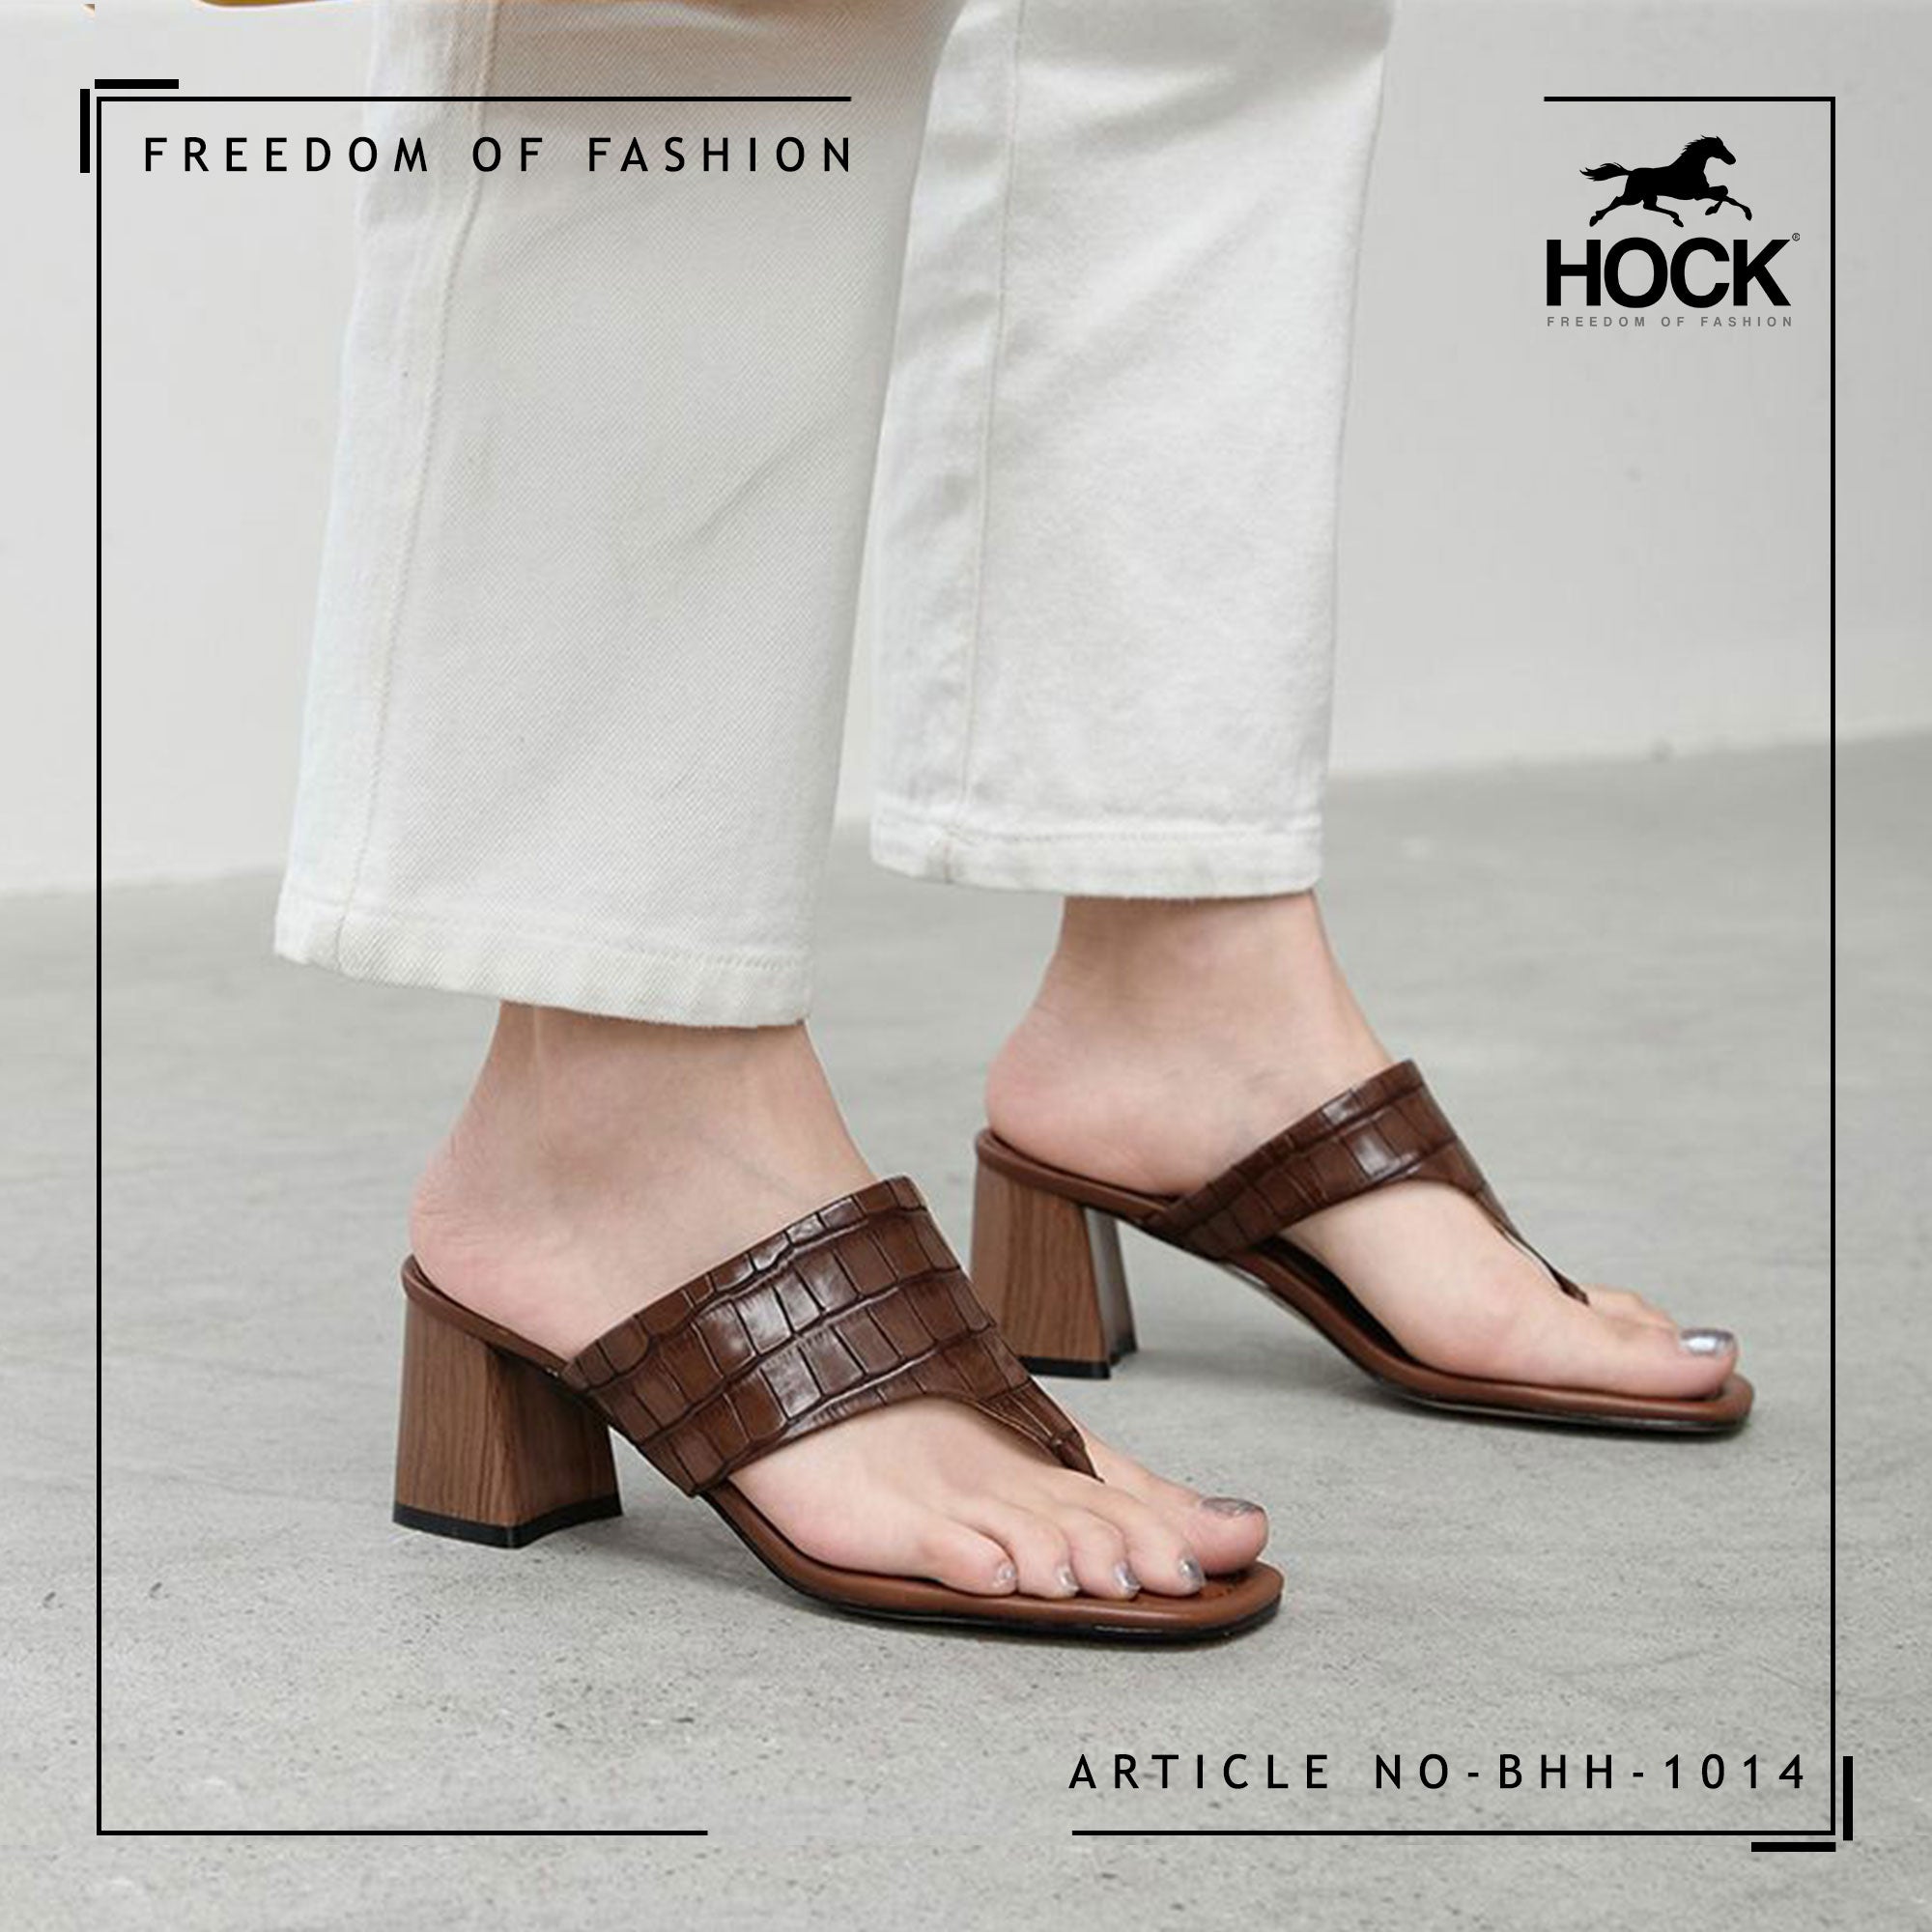 Aldo Shoes - Pakistan - These block heel sandals are the perfect addition  to your trend-inspired shoe collection this season. Shop this on FLAT 50%  OFF at your nearest store or online